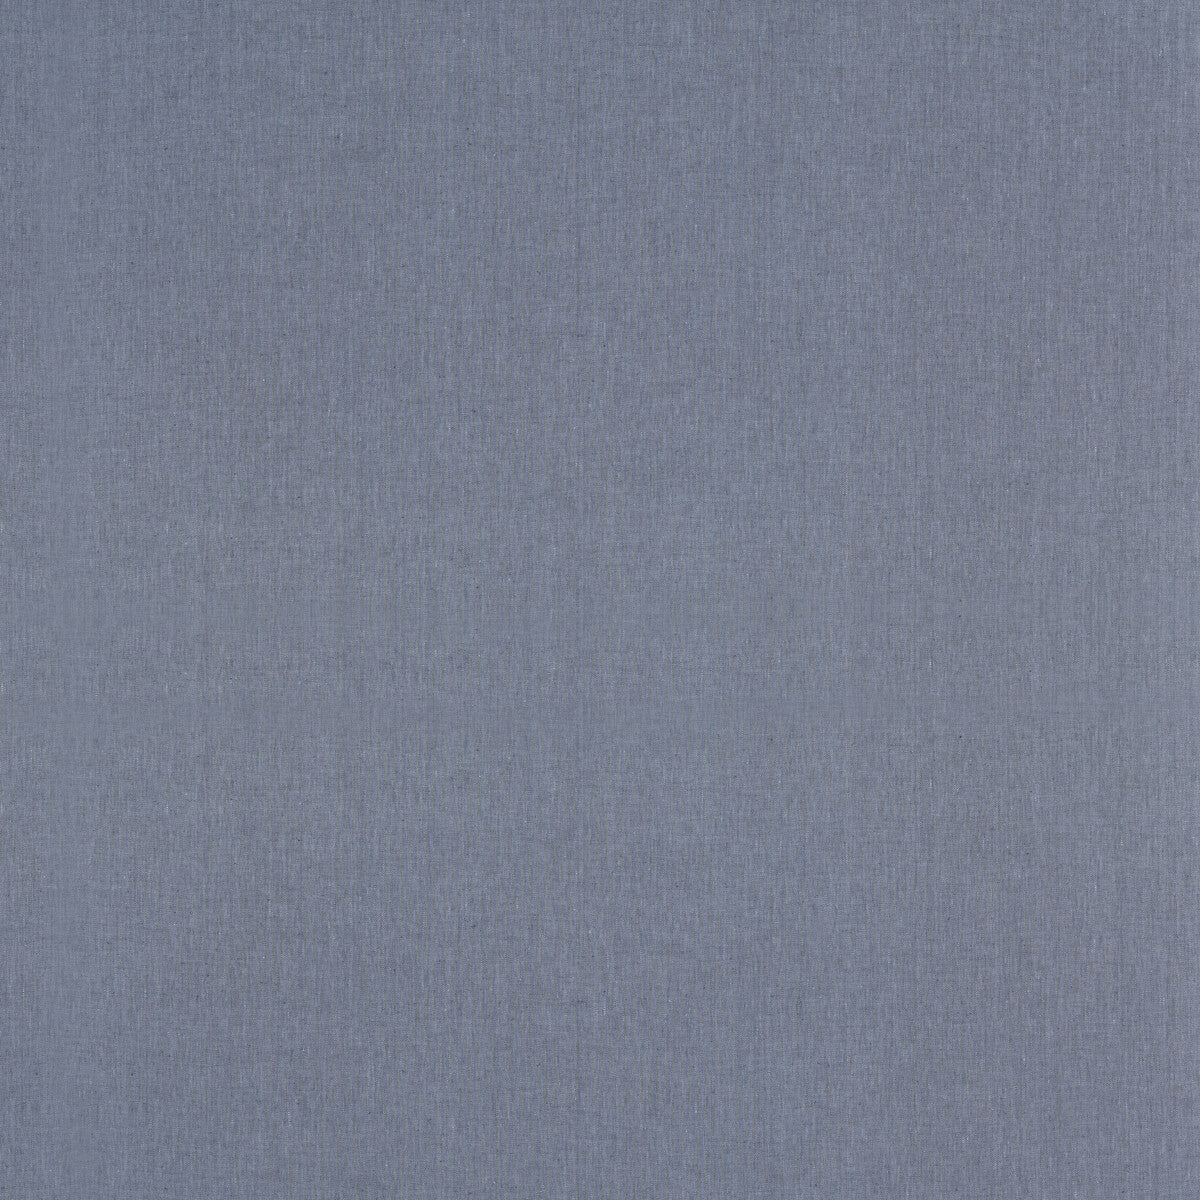 Sarsden fabric in denim color - pattern BF11039.640.0 - by G P &amp; J Baker in the Baker House Plain &amp; Stripe II collection